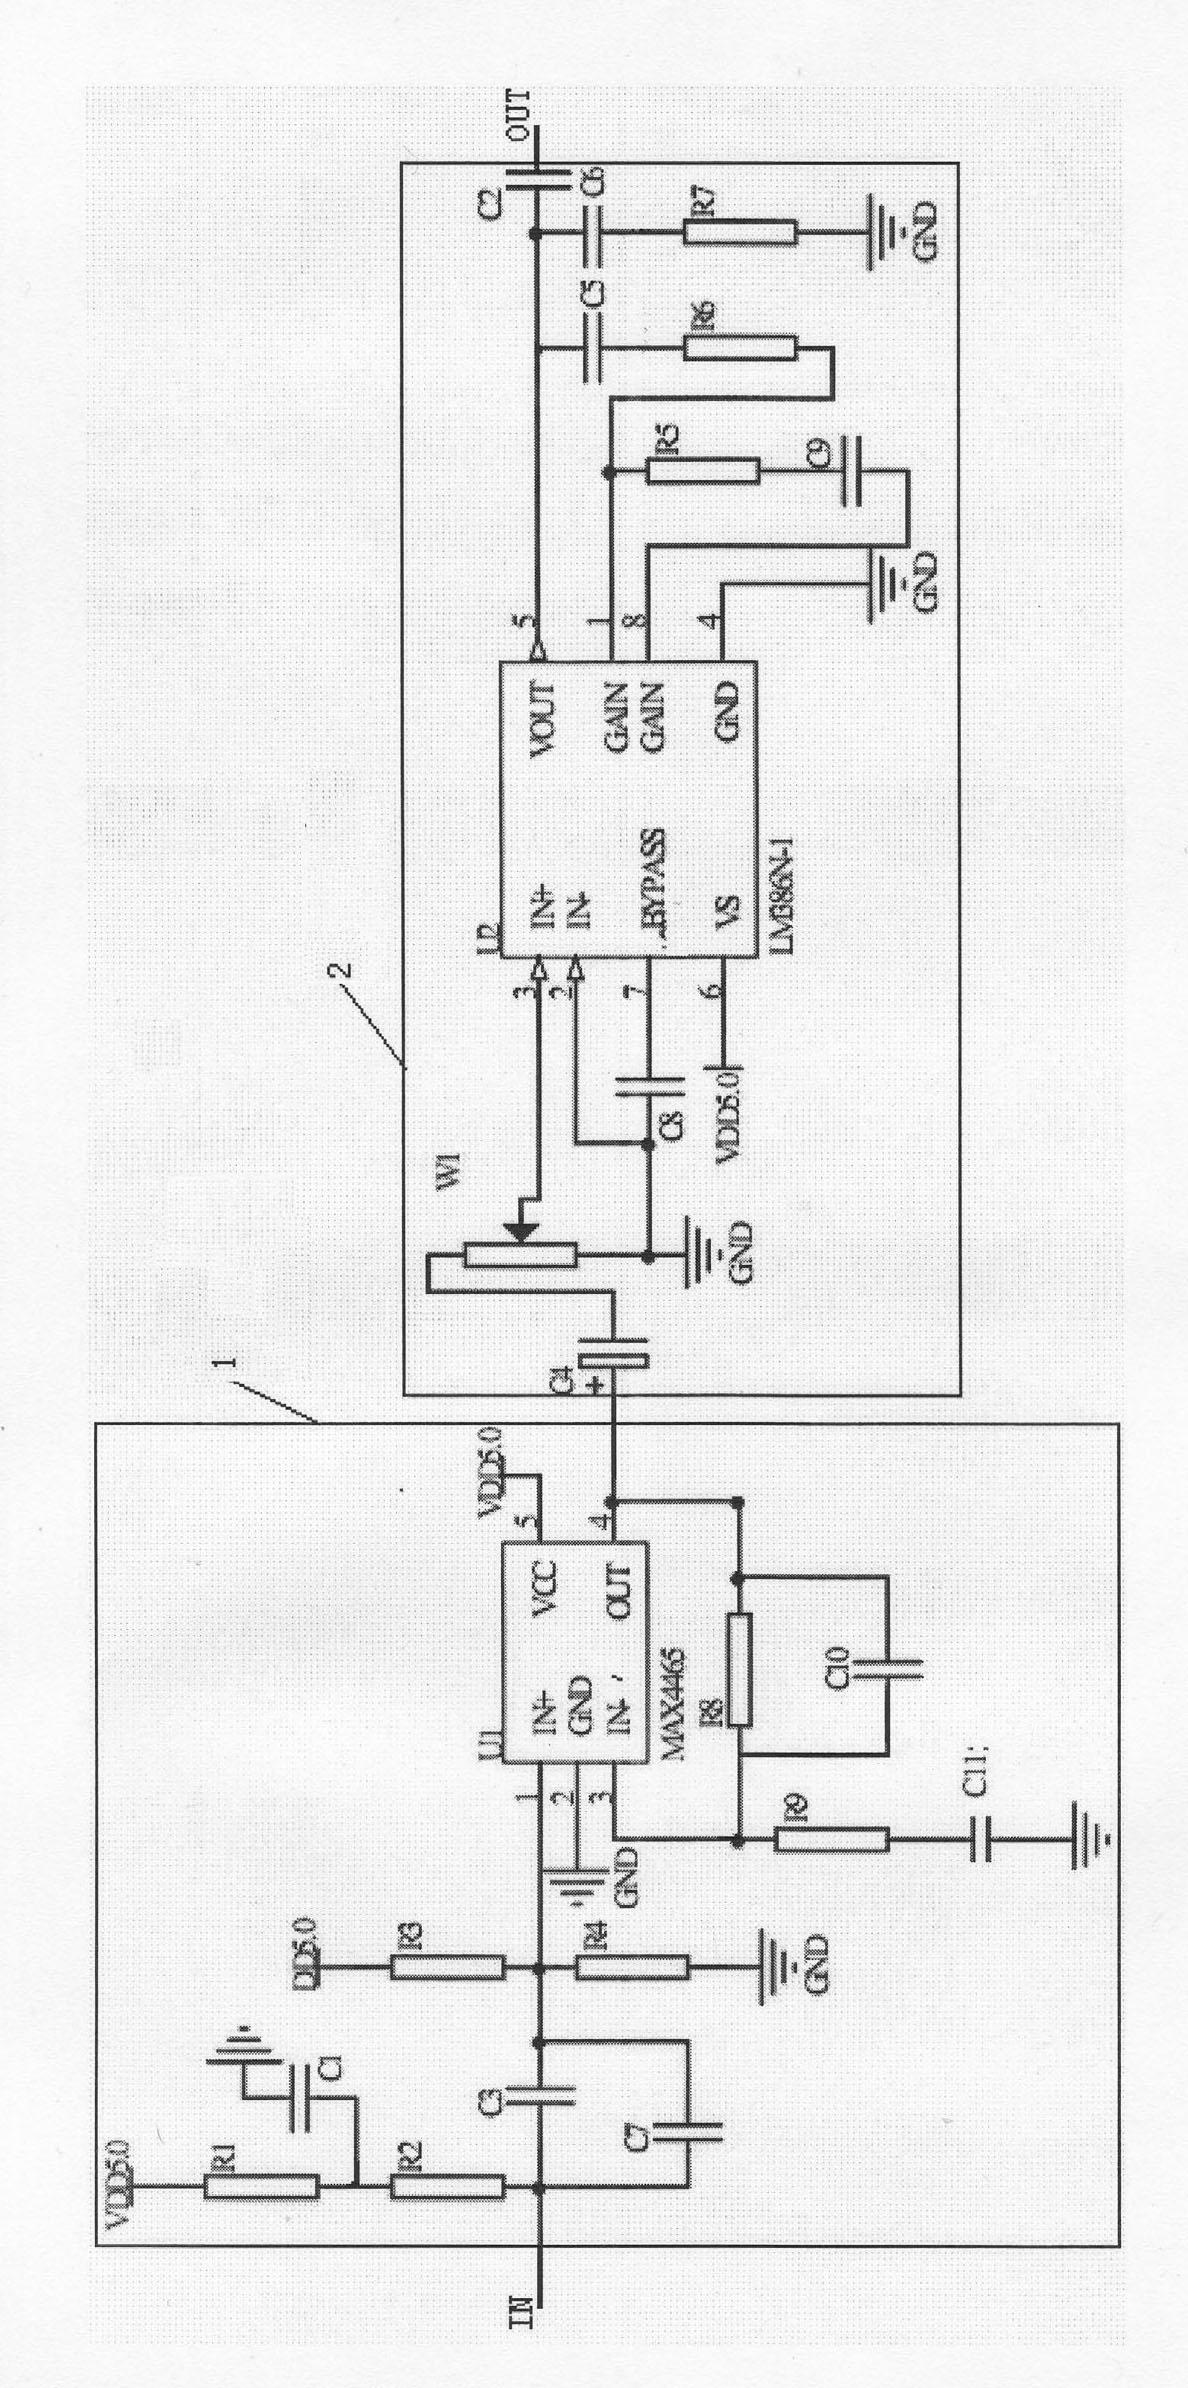 Cardiac sound amplifying circuit based on MAX 4465 amplifier chip and LM 386 amplifier chip